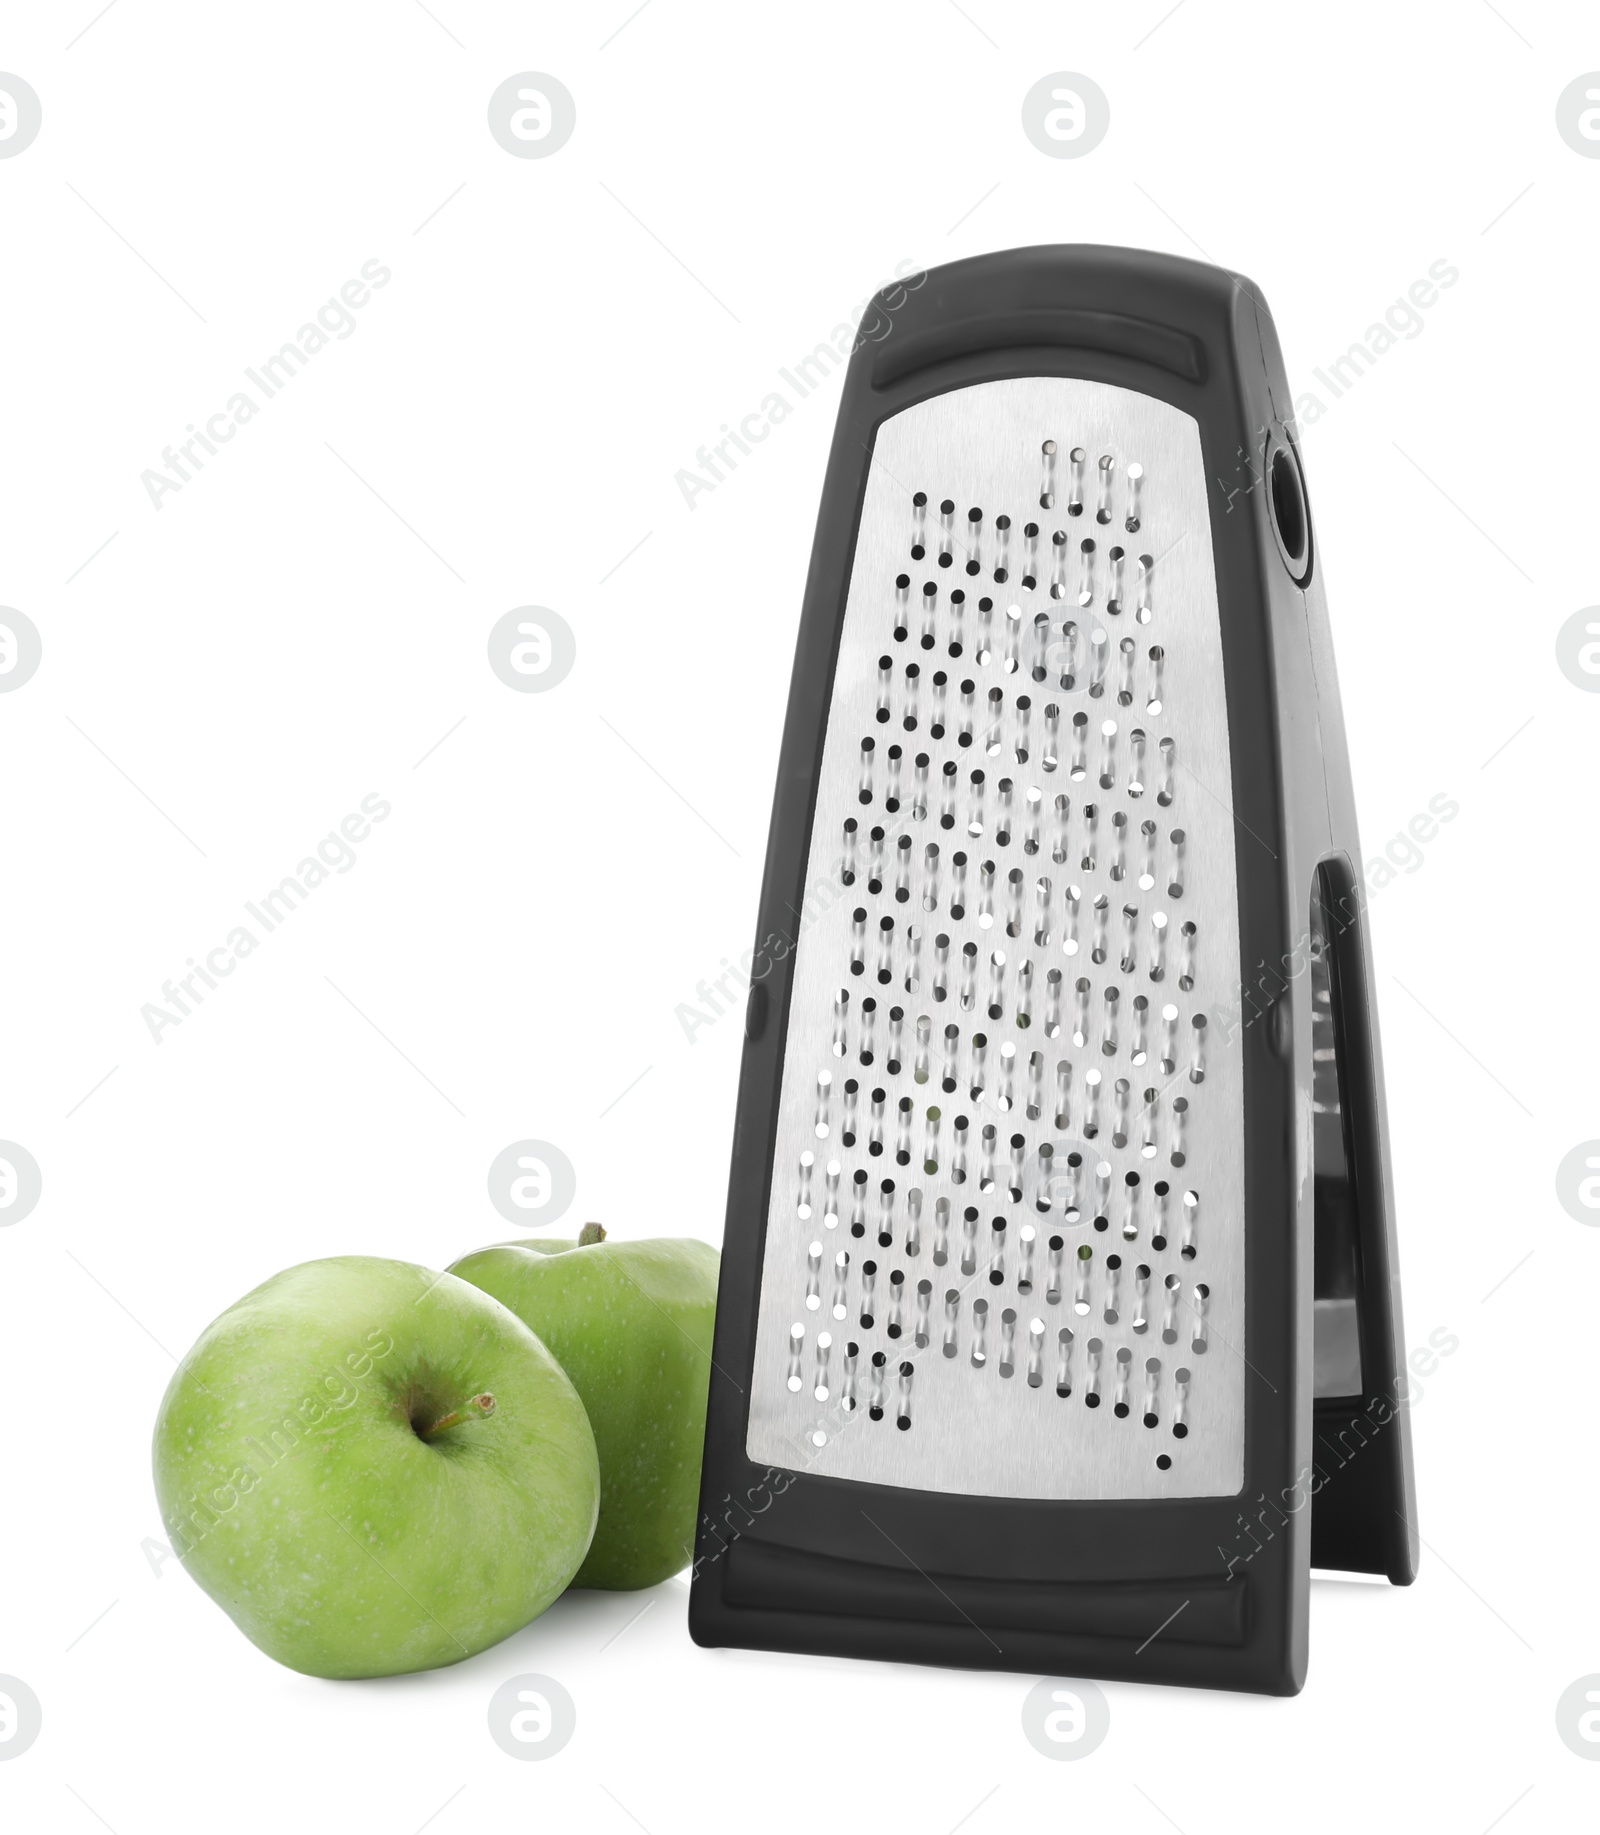 Photo of Stainless steel grater and fresh apples on white background